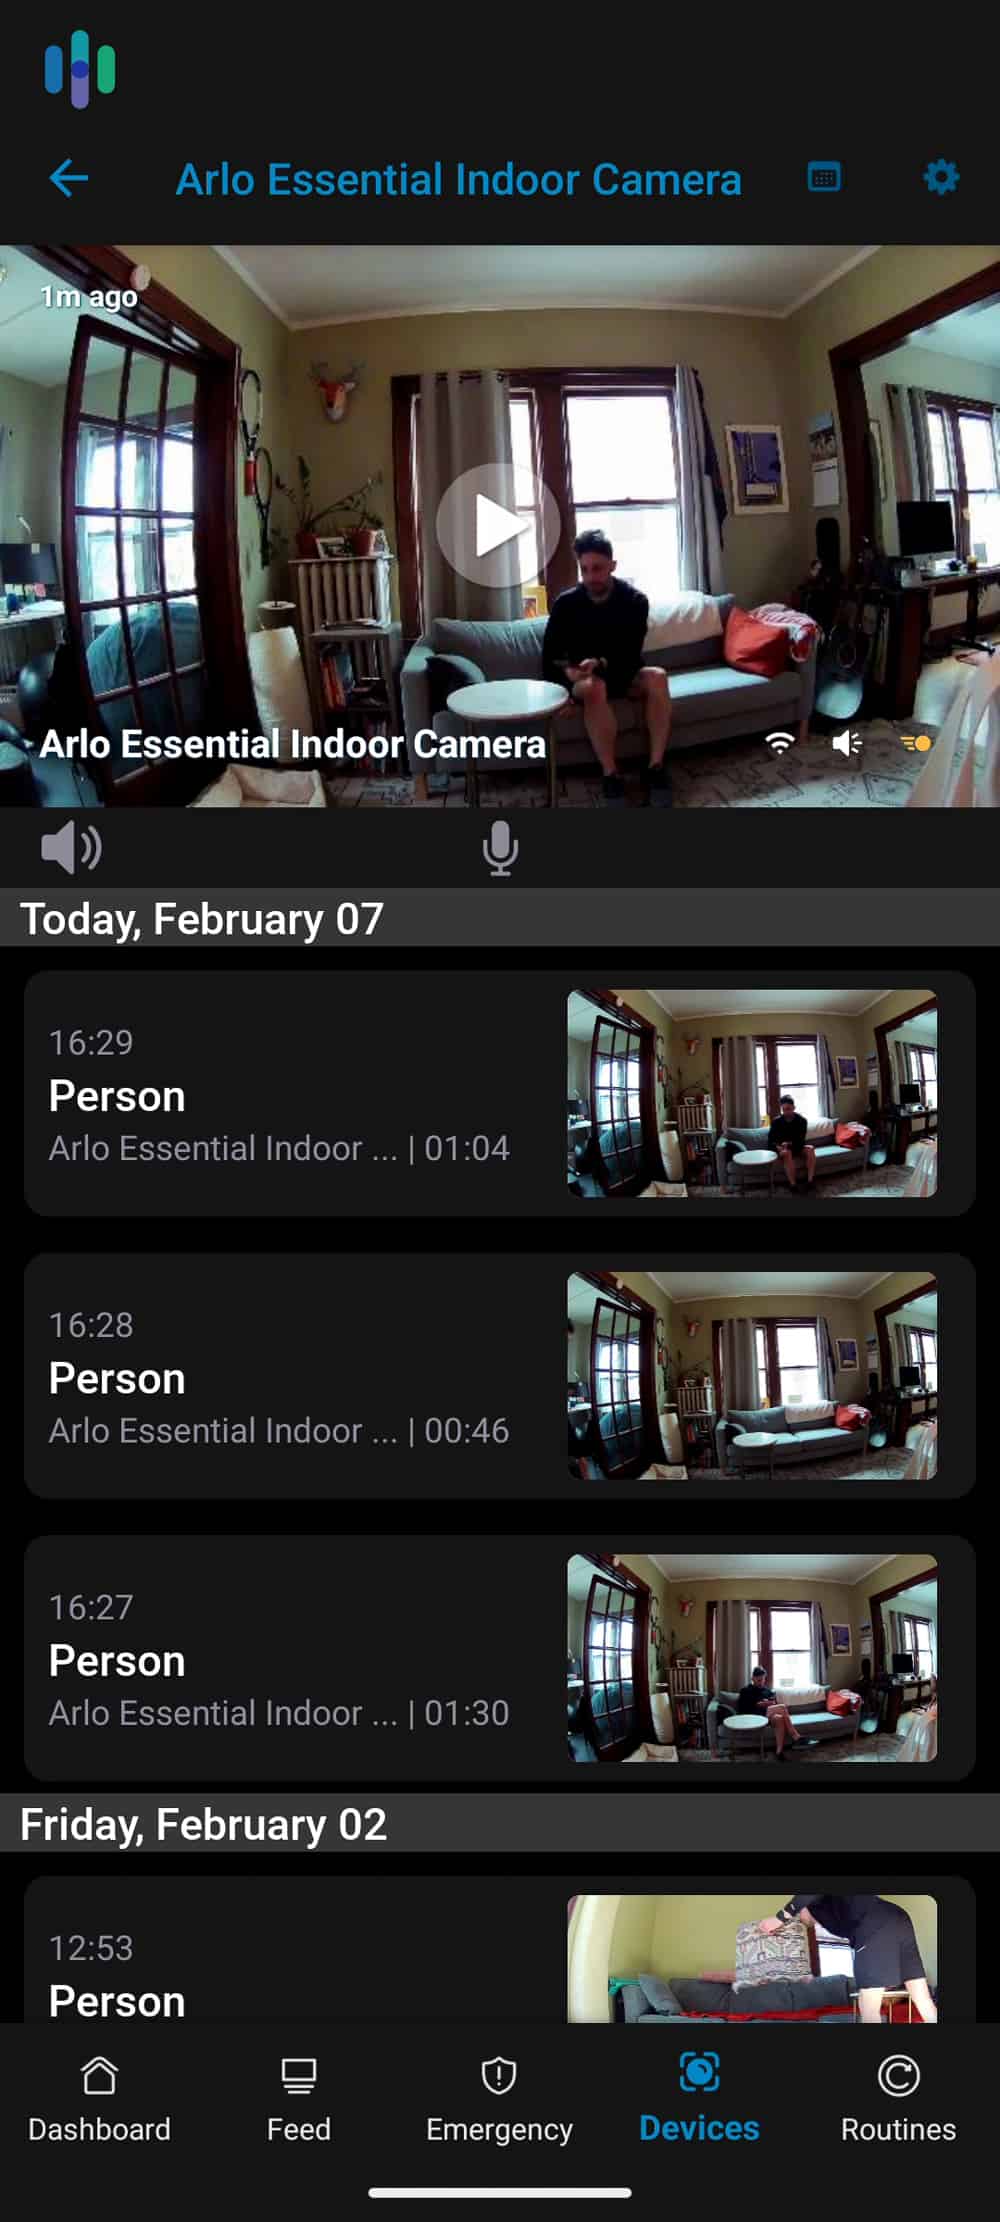 Our devices view on the Arlo Secure app